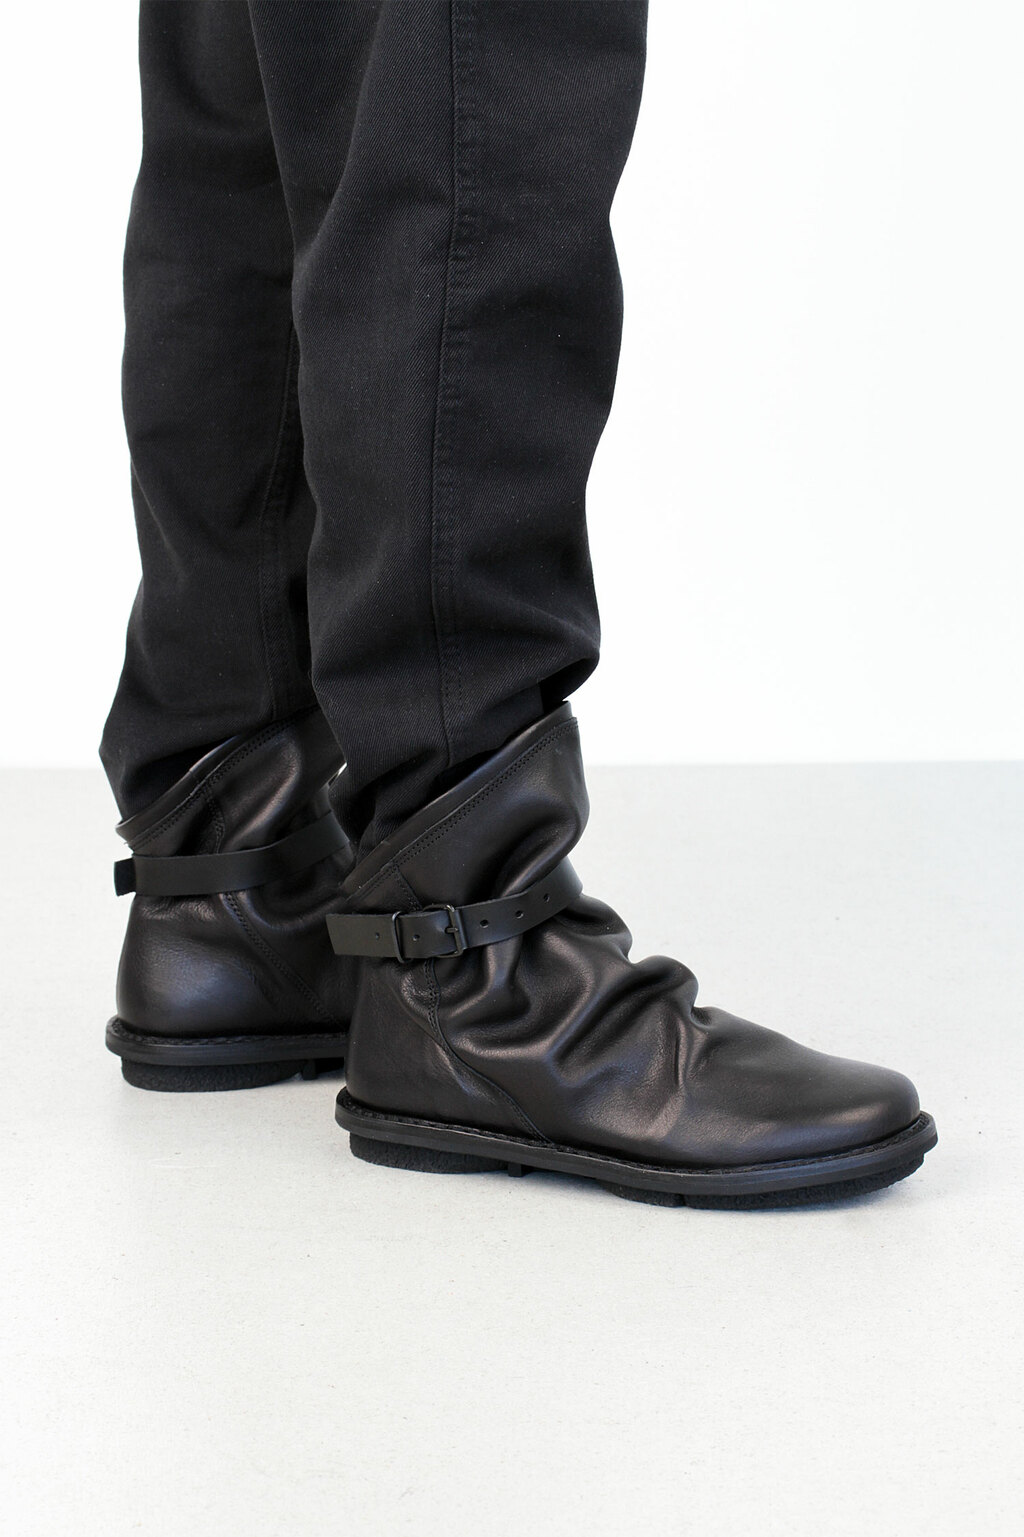 m - Trippen shoes - exceptional design and quality from Germany